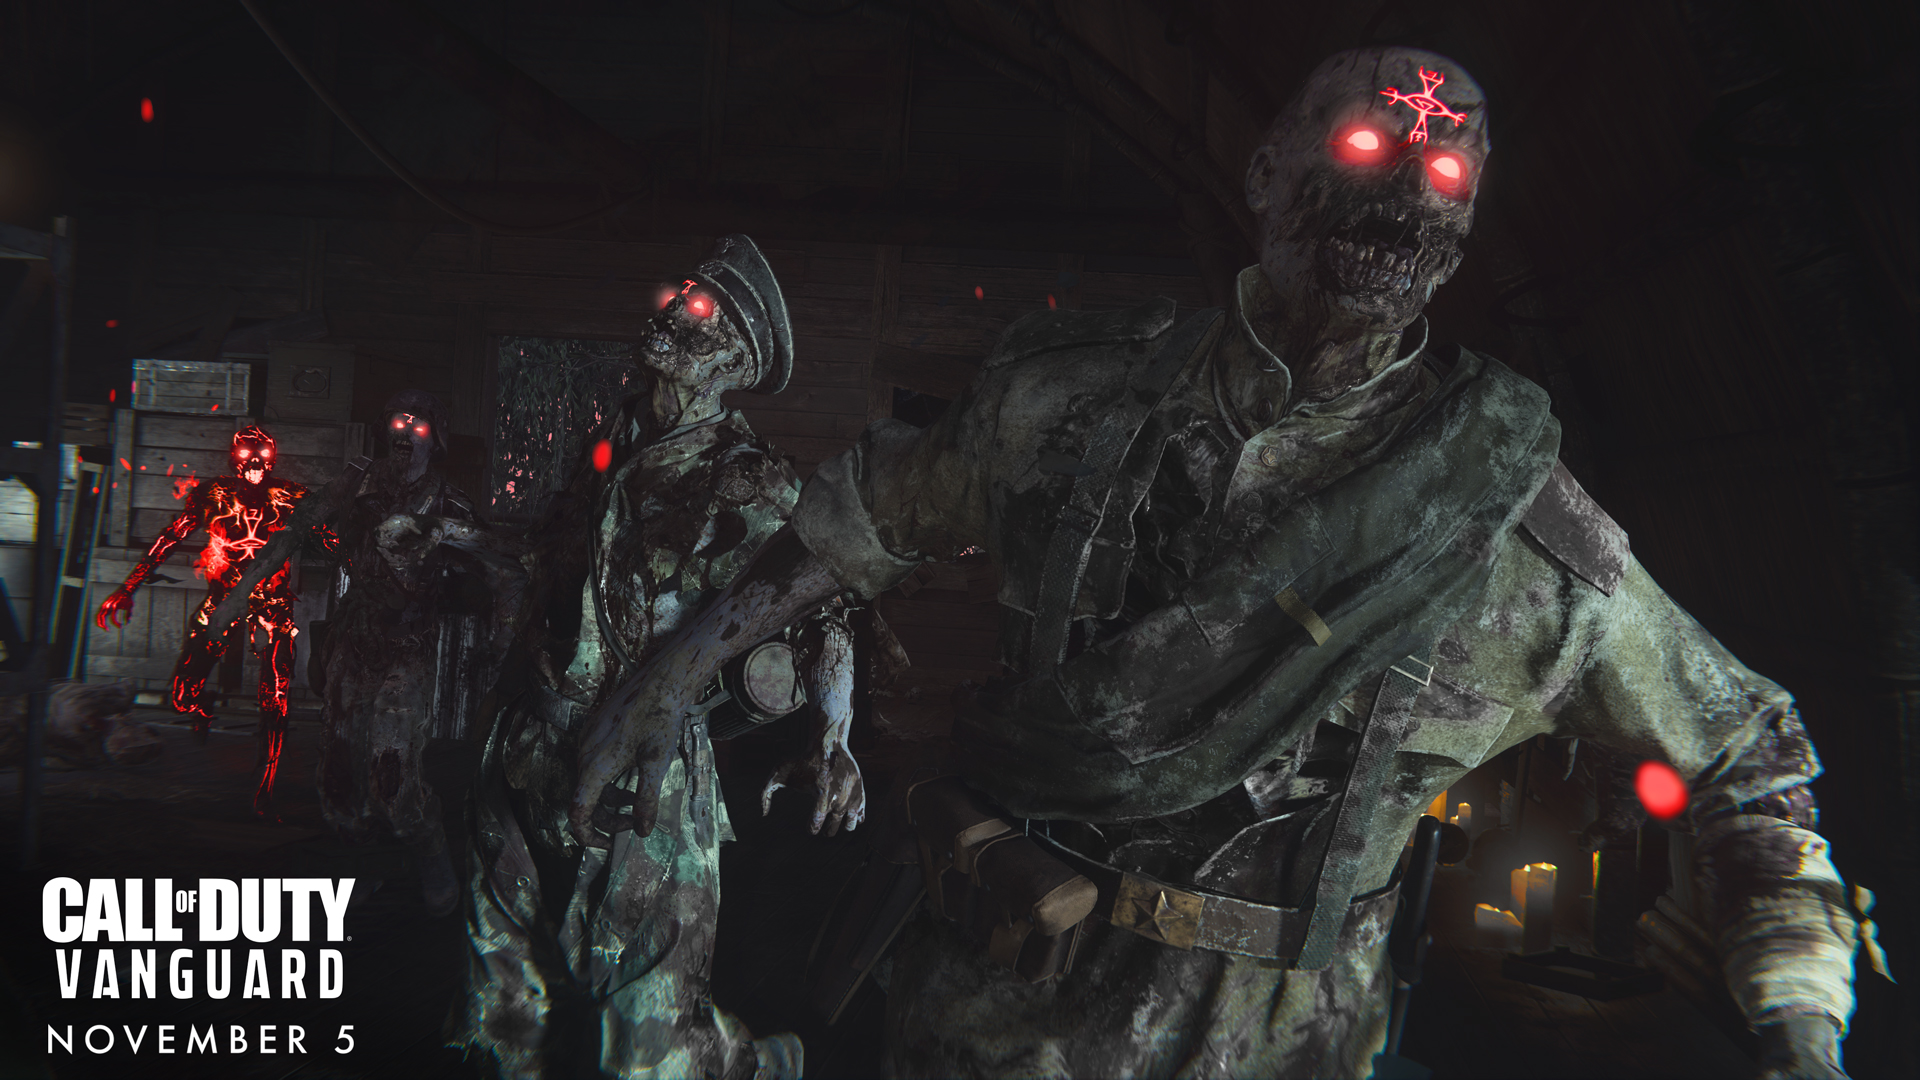 Call of Duty®: Vanguard Zombies — The Next Chapter in the Dark Aether Saga